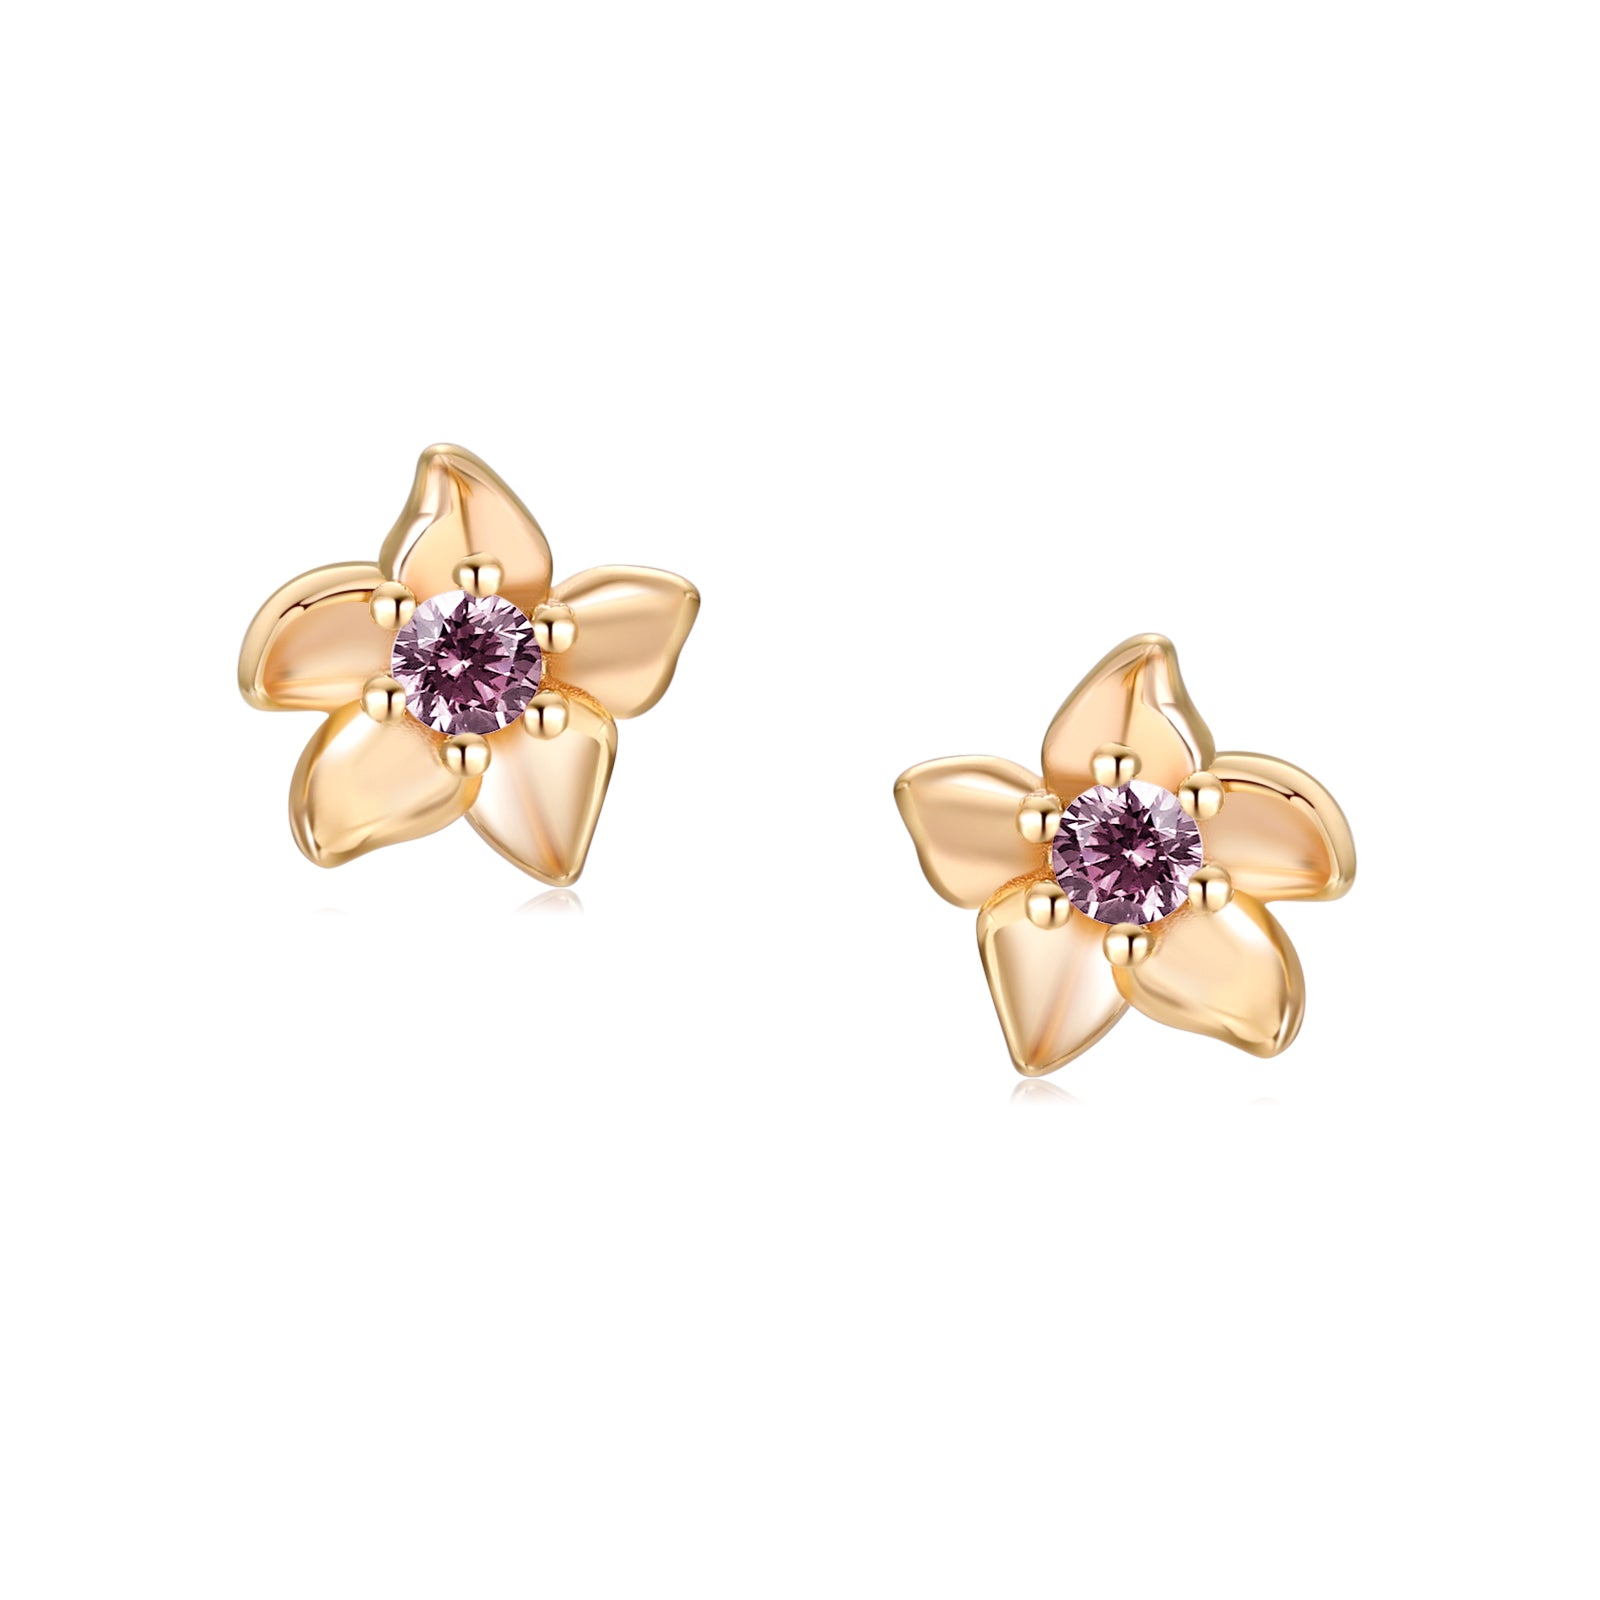 Floral Gold Stud Earrings - Iris | LOVE BY THE MOON